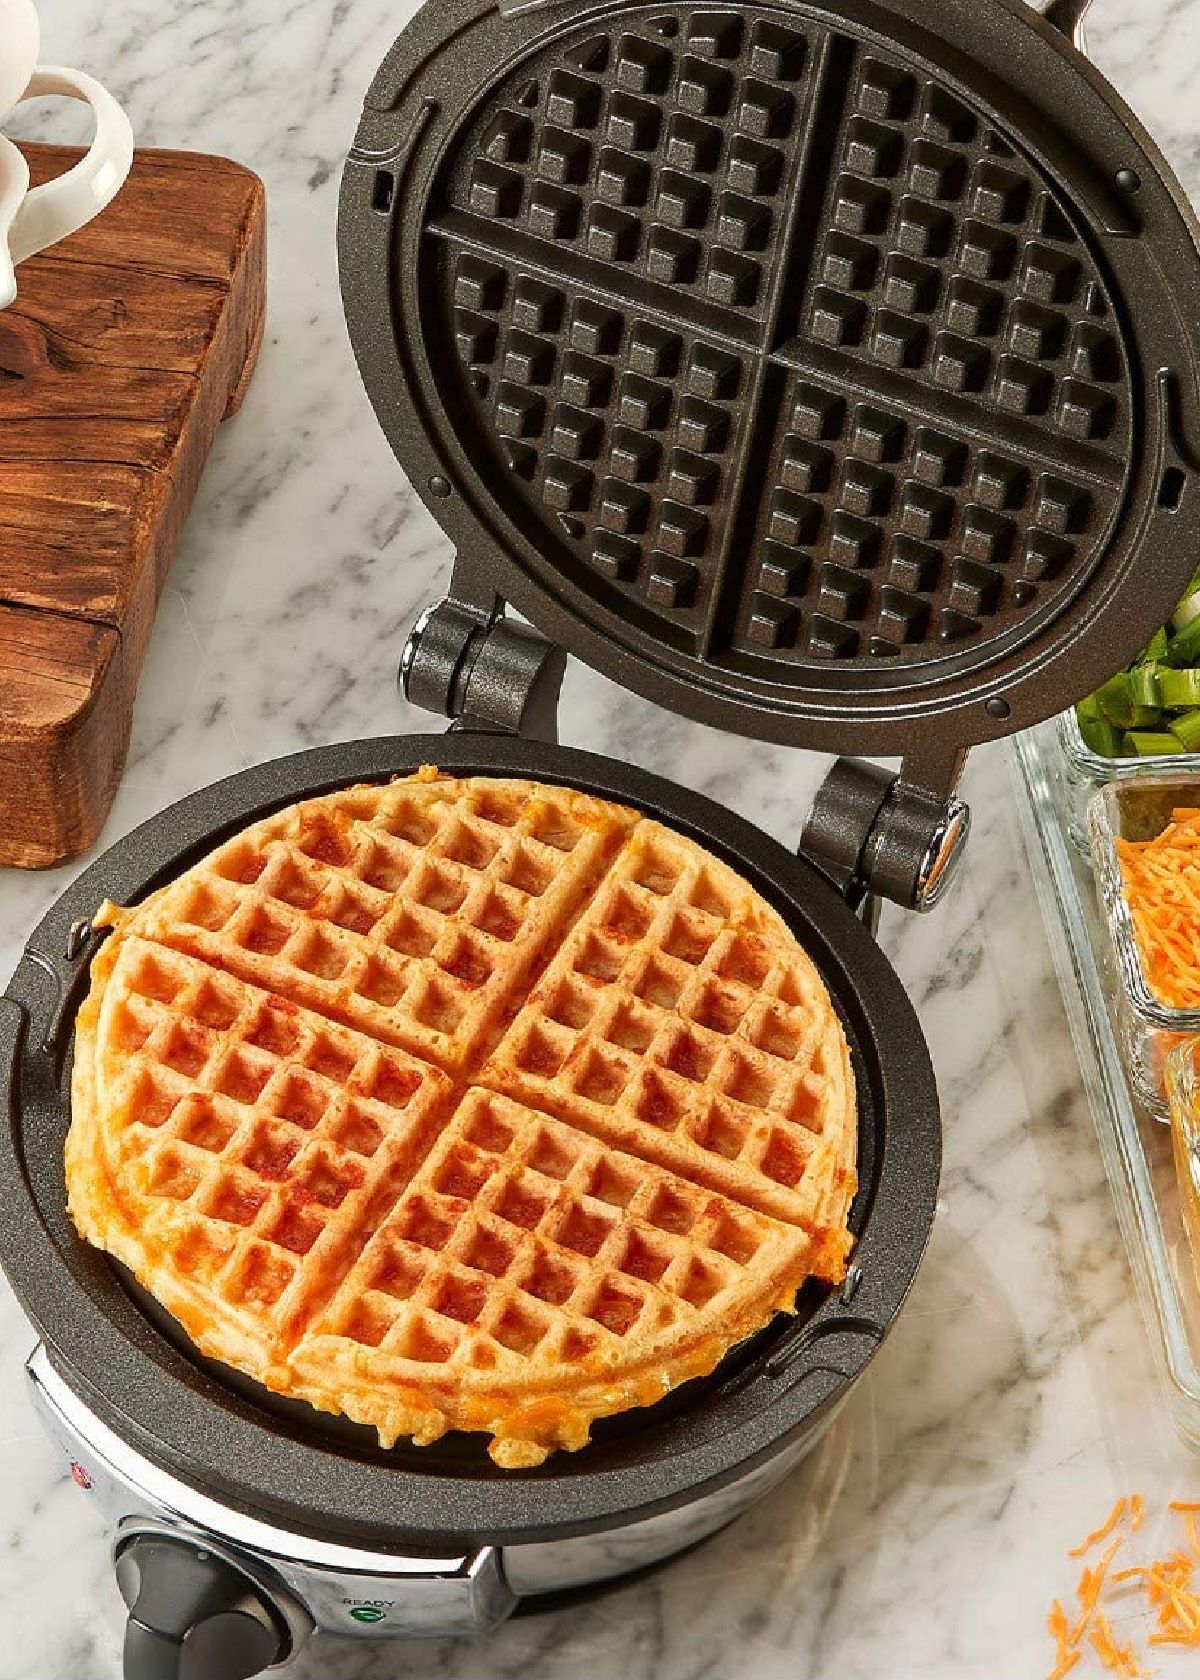 This Breakfast Maker Lets You Stuff Belgian Waffles With All the Toppings  Your Heart Desires